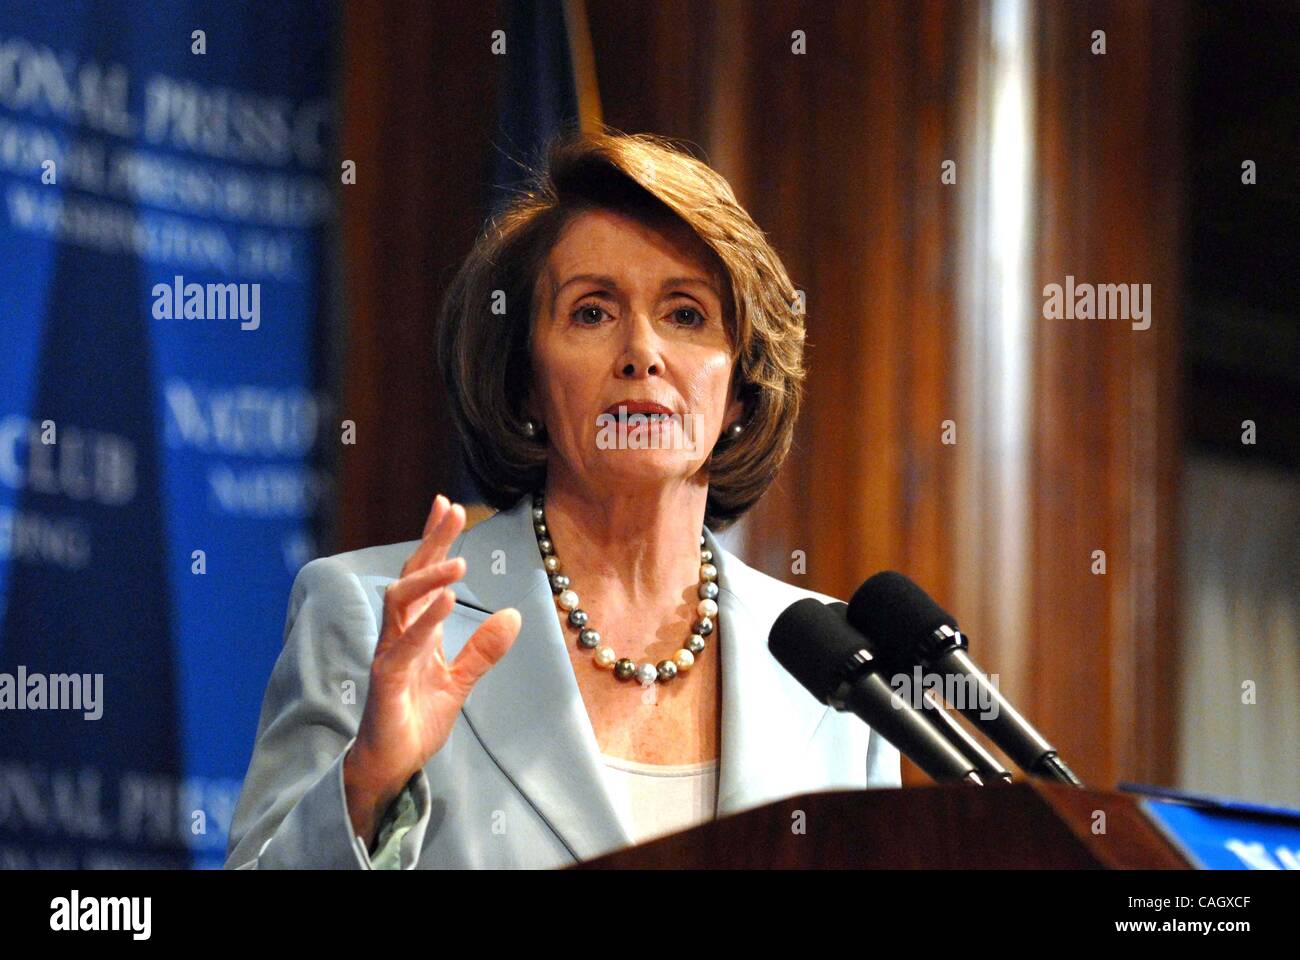 Jan. 25, 2008 - Washington, District of Columbia, U.S. - I12955CB.Speaker of the House Nancy Pelosi and Congressman Harry Reid speak to journalists about their views of the State of the Union prior to President Bush delivering his final State of the Union address. Washington, D.C. 01-25-2008(Credit  Stock Photo